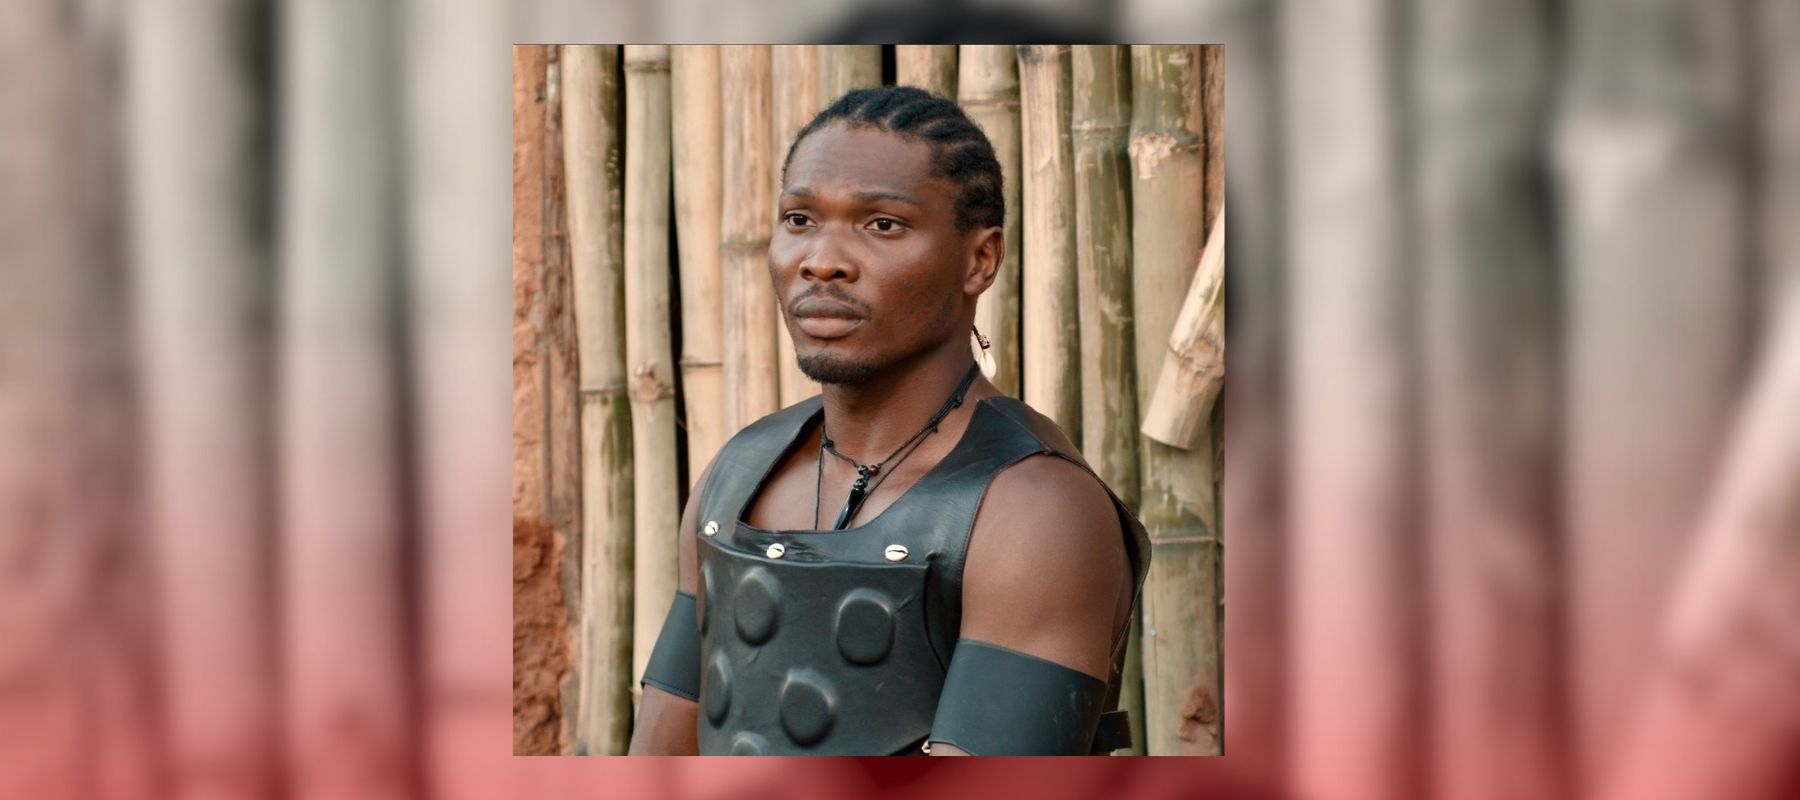 Mike Afolarin takes on an intense role in House of Ga'a